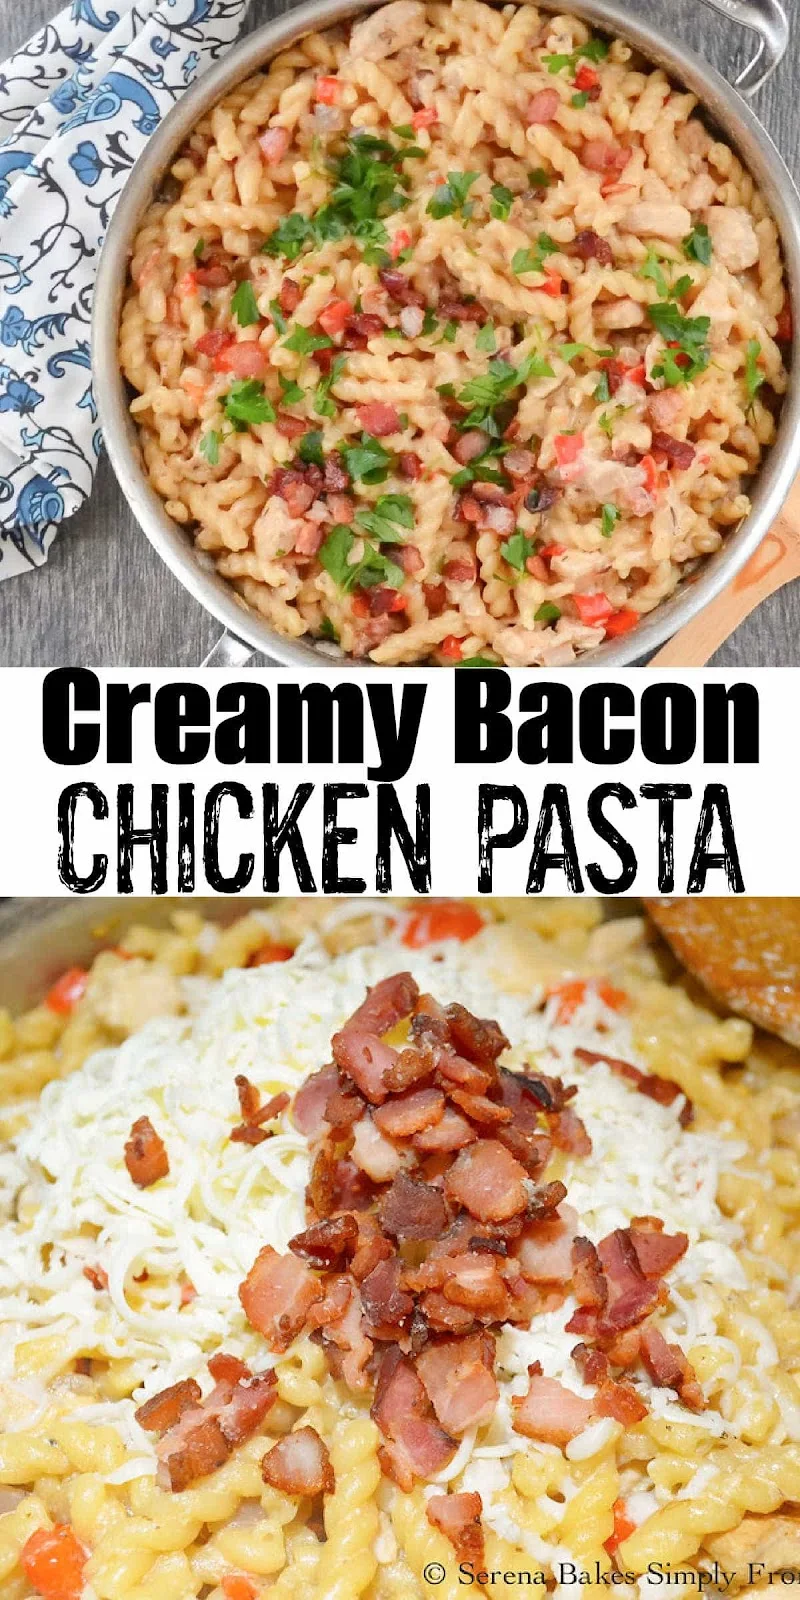 2 photos of Creamy Bacon Chicken Pasta in a skillet with a white banner between the two photos with black text Creamy Bacon Chicken Pasta.